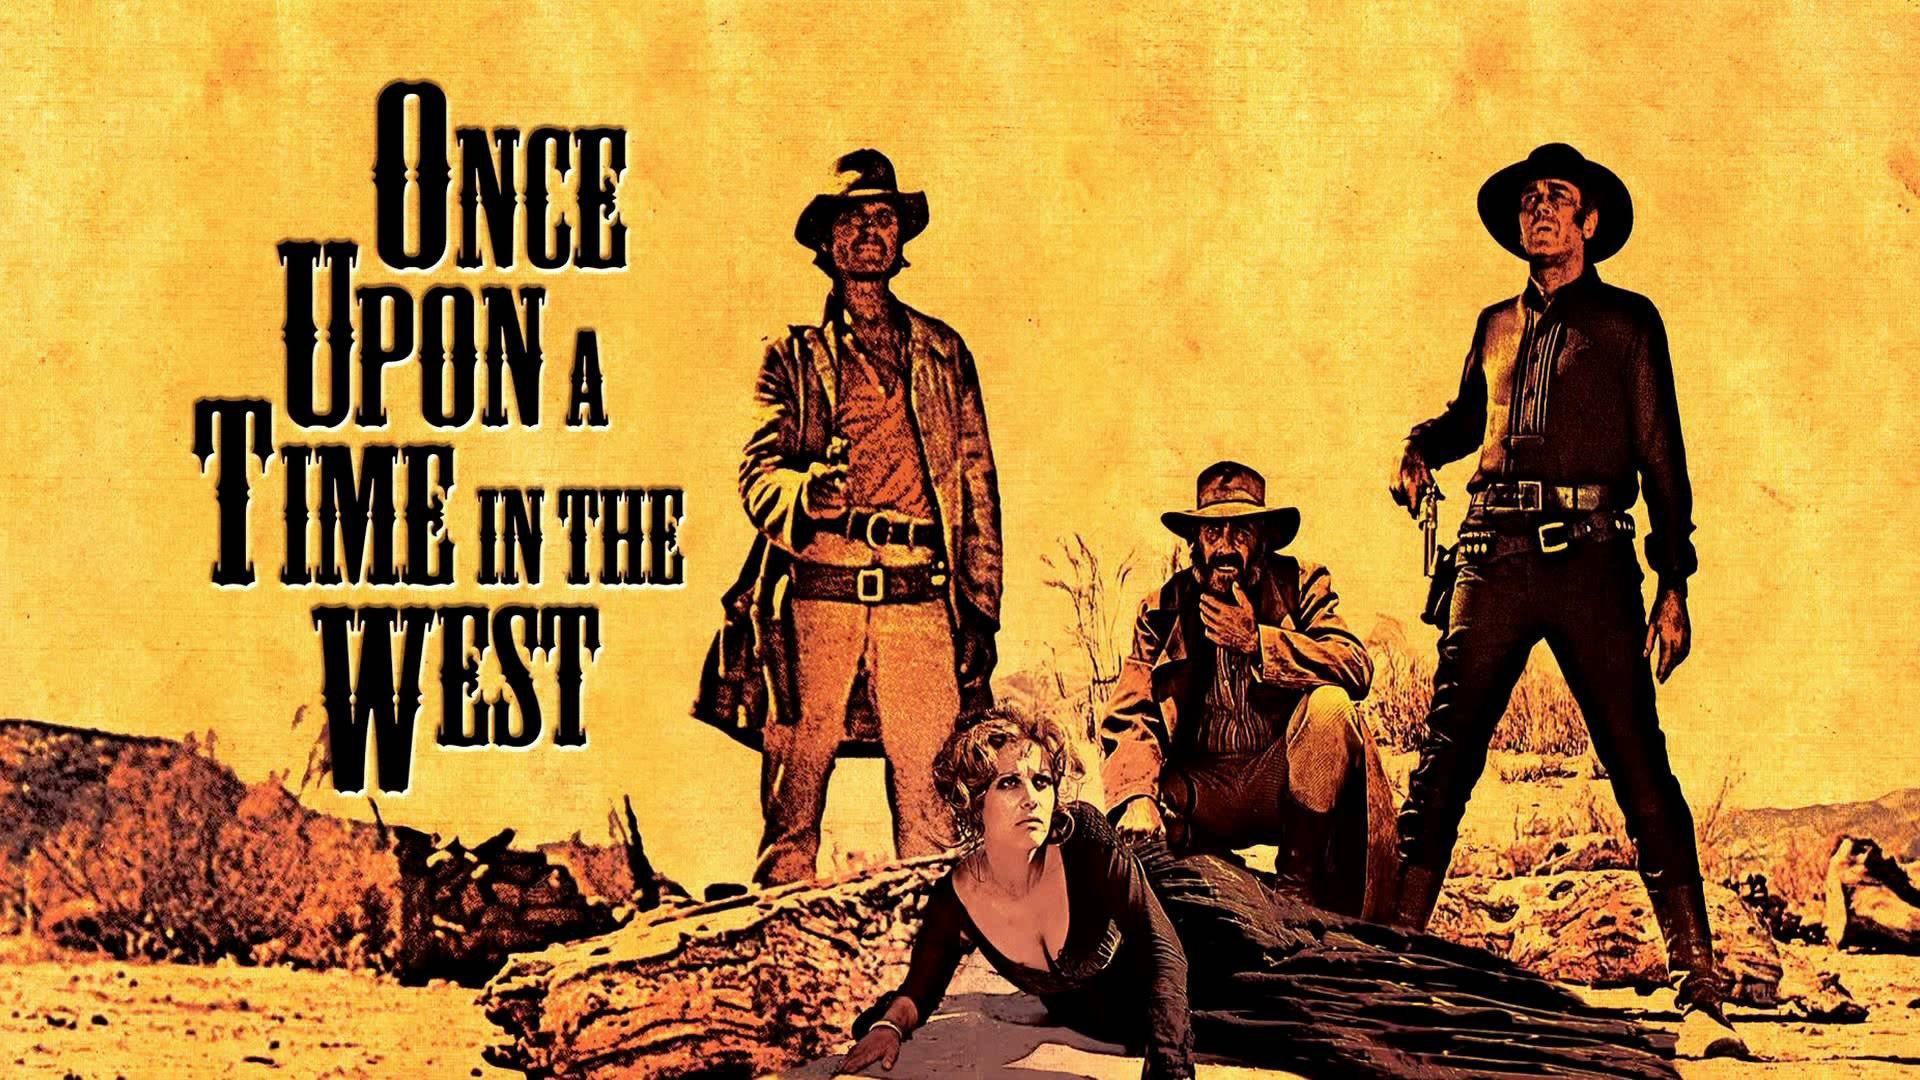 Banner Phim Miền viễn Tây ngày ấy (Once Upon a Time in the West)